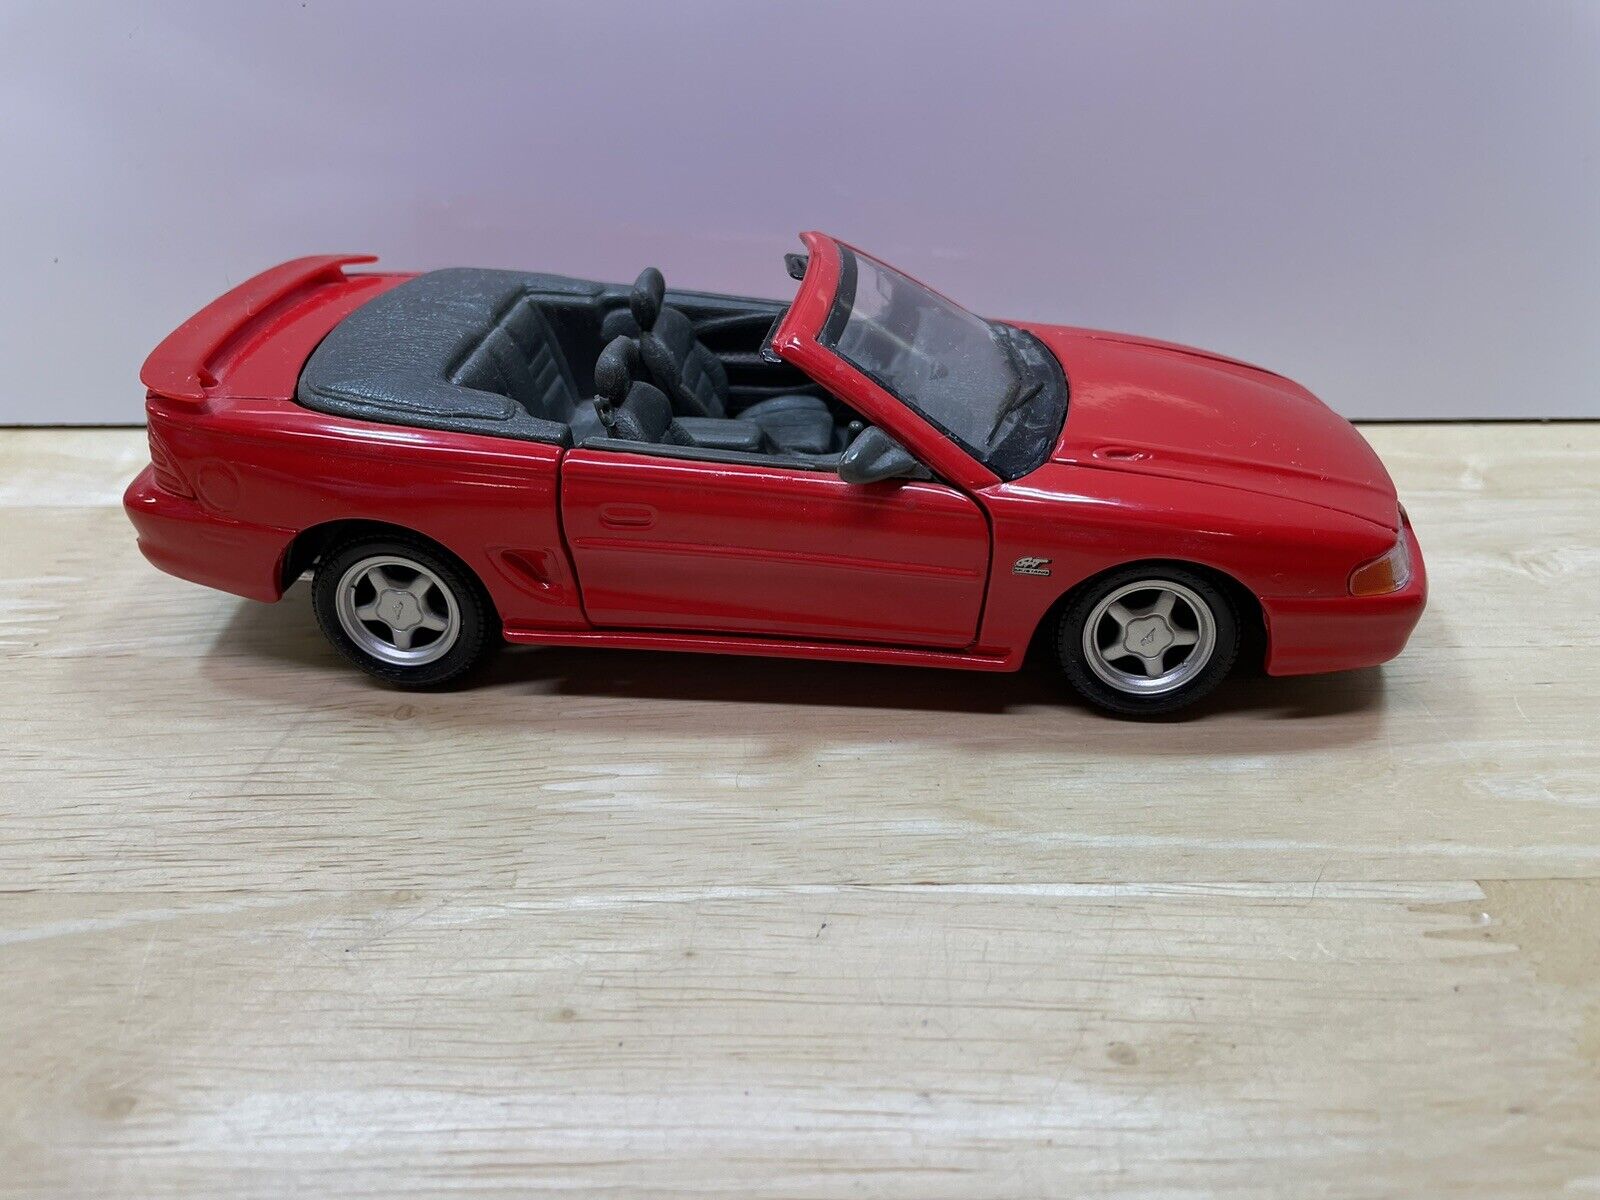 Vintage Maisto 1:24 Red 1994 Ford Mustang GT Diecast